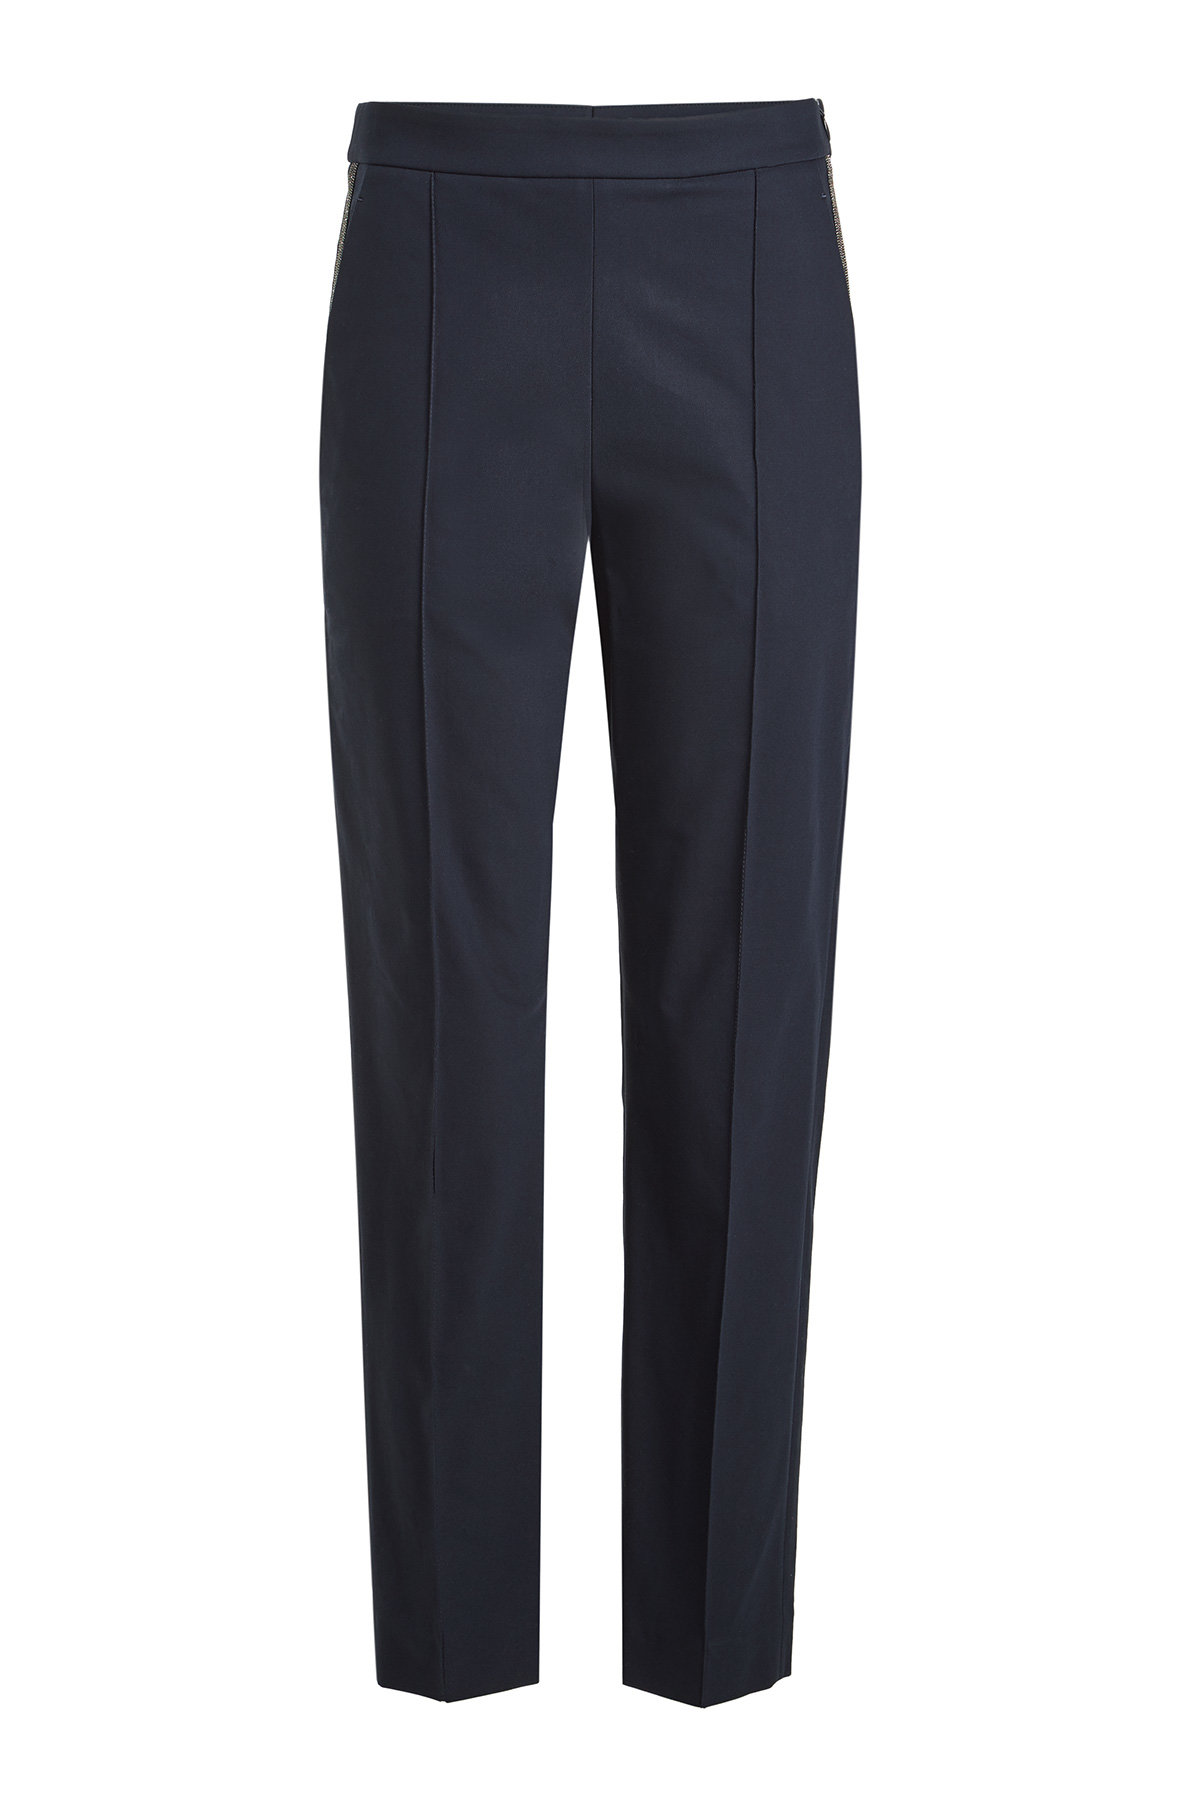 Brunello Cucinelli - Cotton Pants with Embellished Pockets